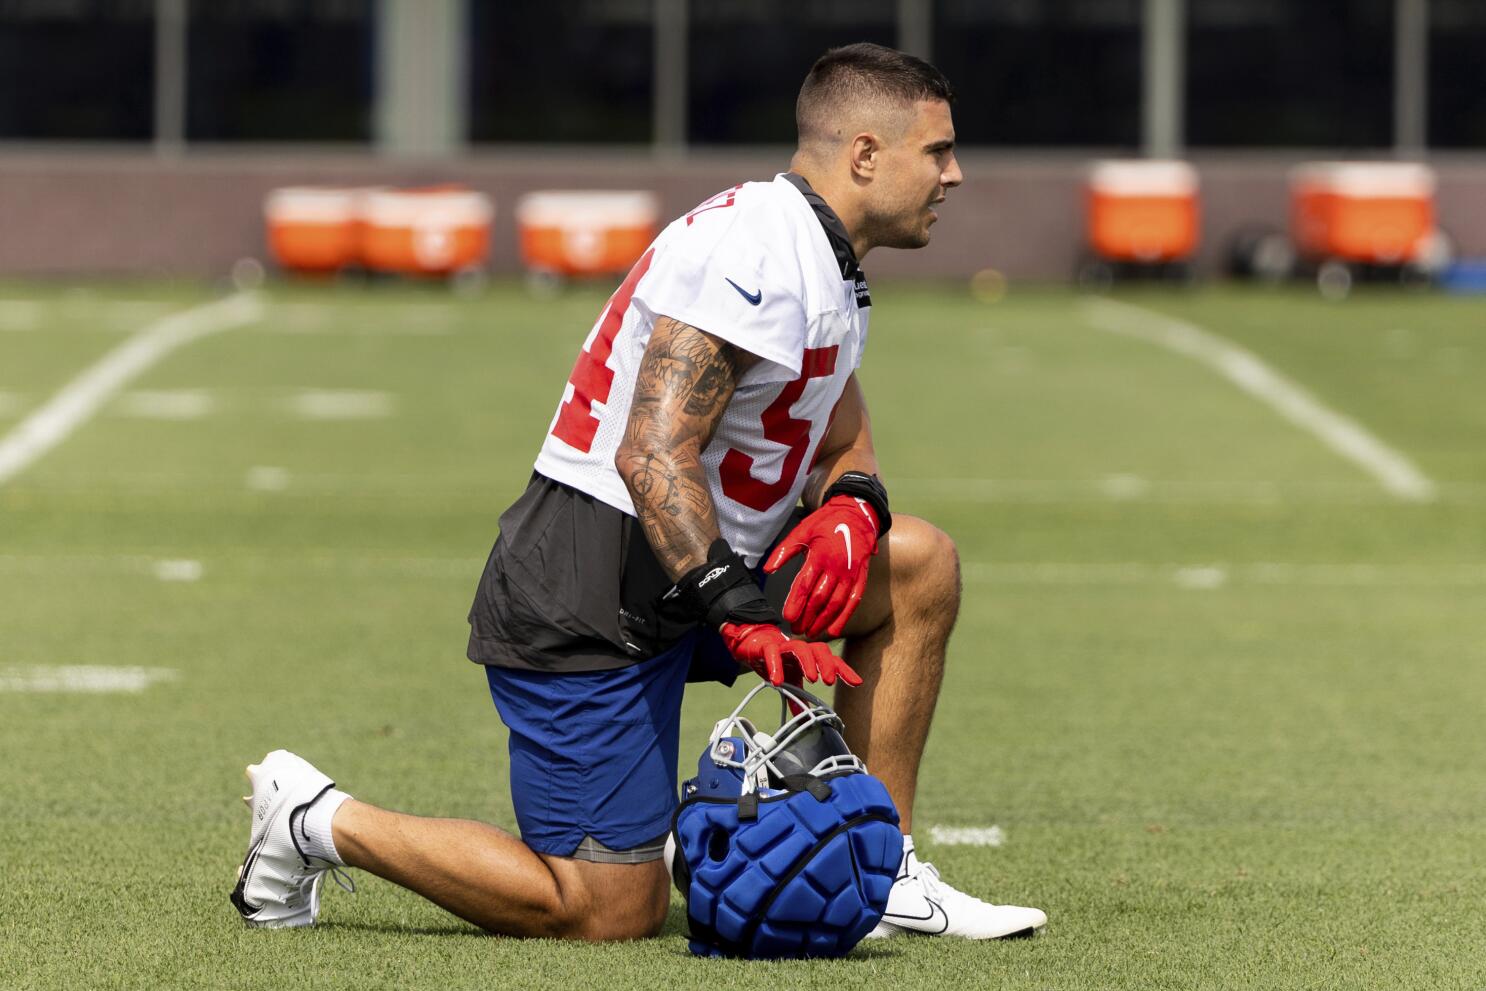 Giants release Martinez less than a year after ACL tear - The San